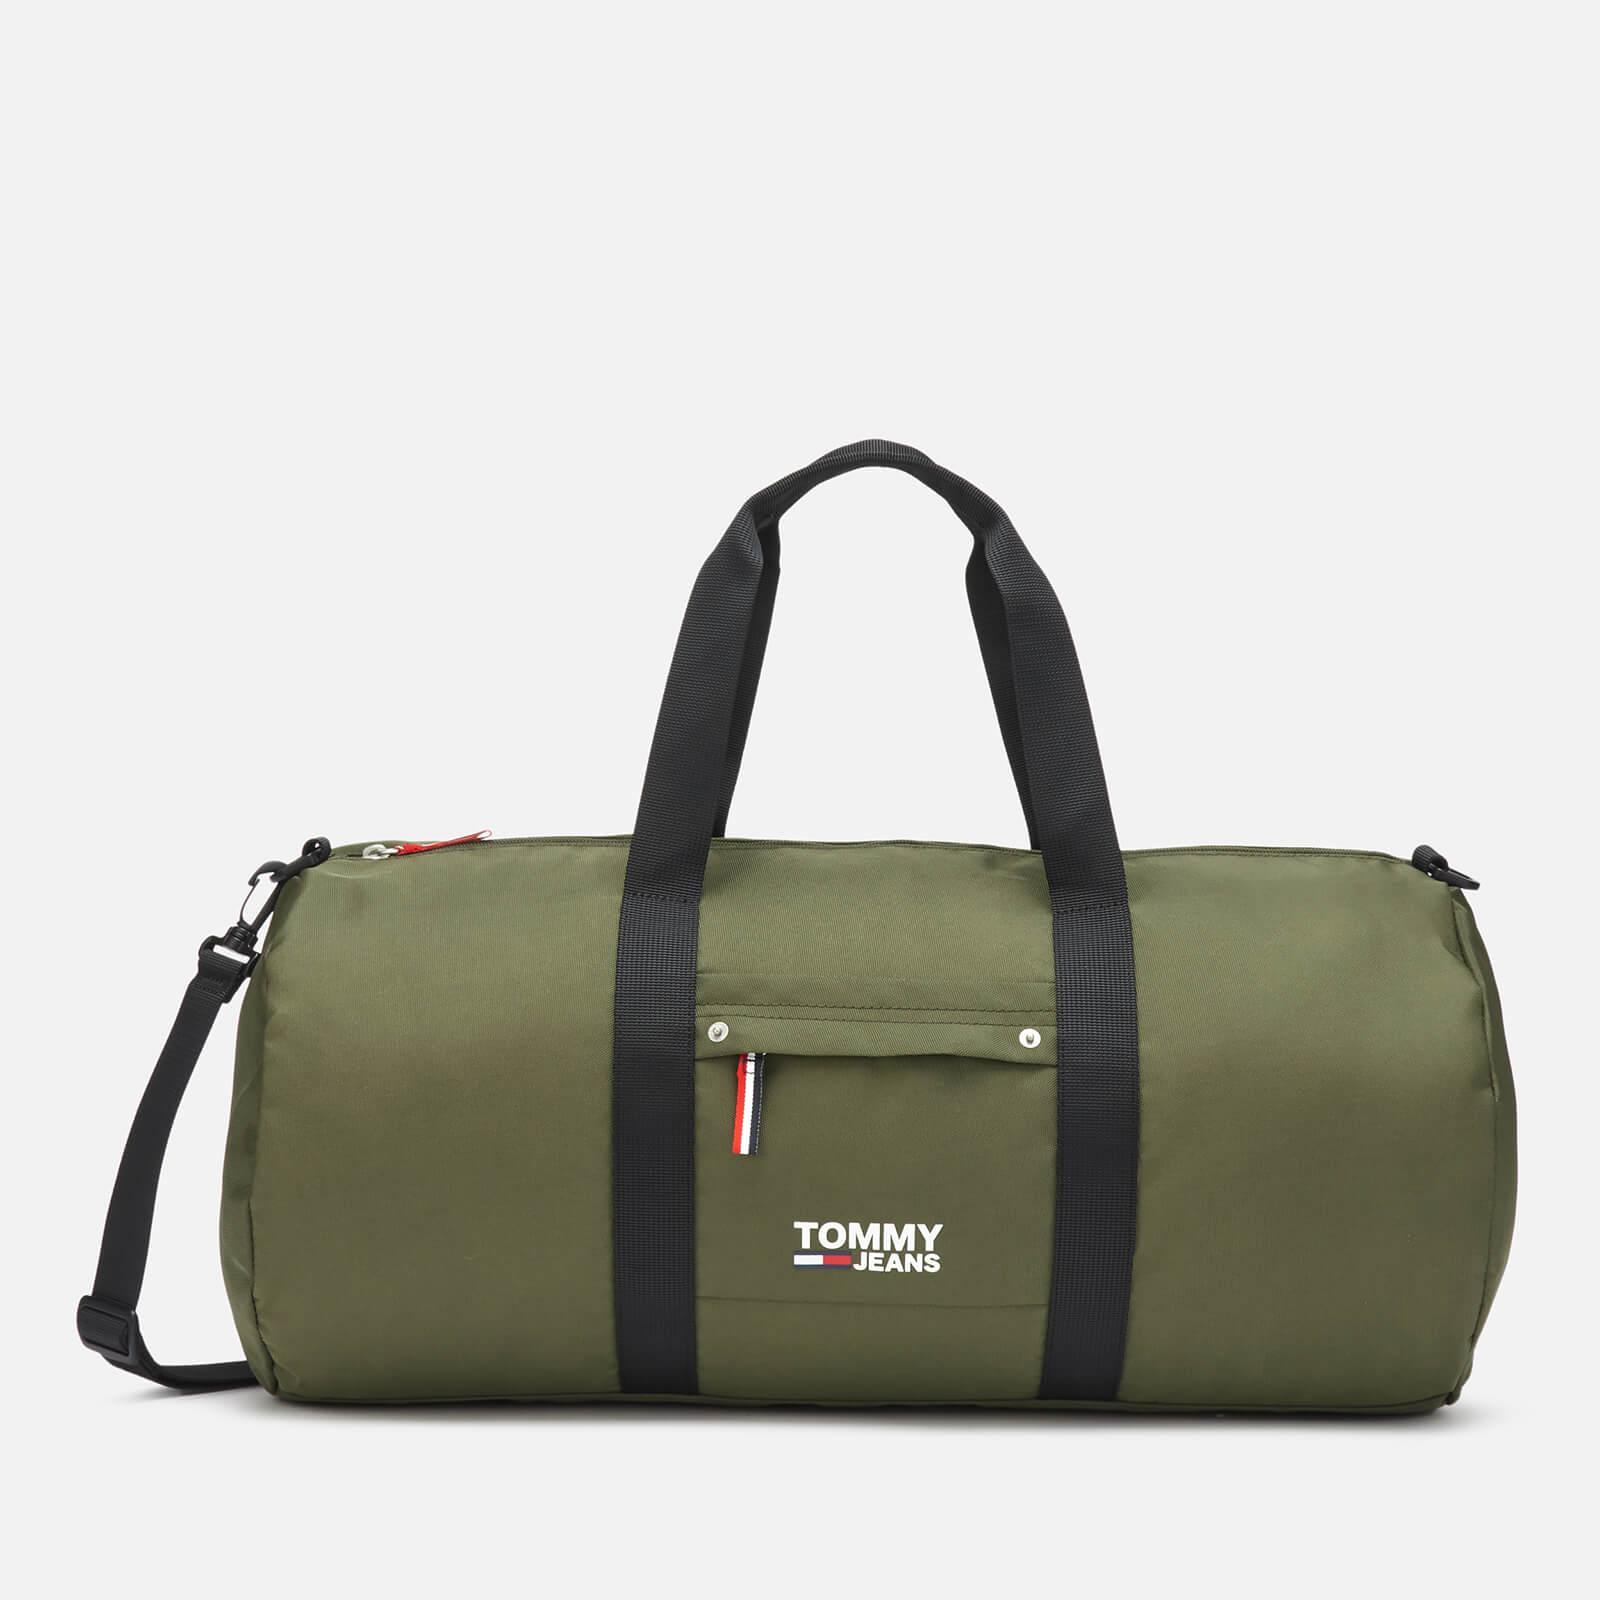 Tommy Hilfiger Cool City Duffle Bag in Green for Men - Lyst